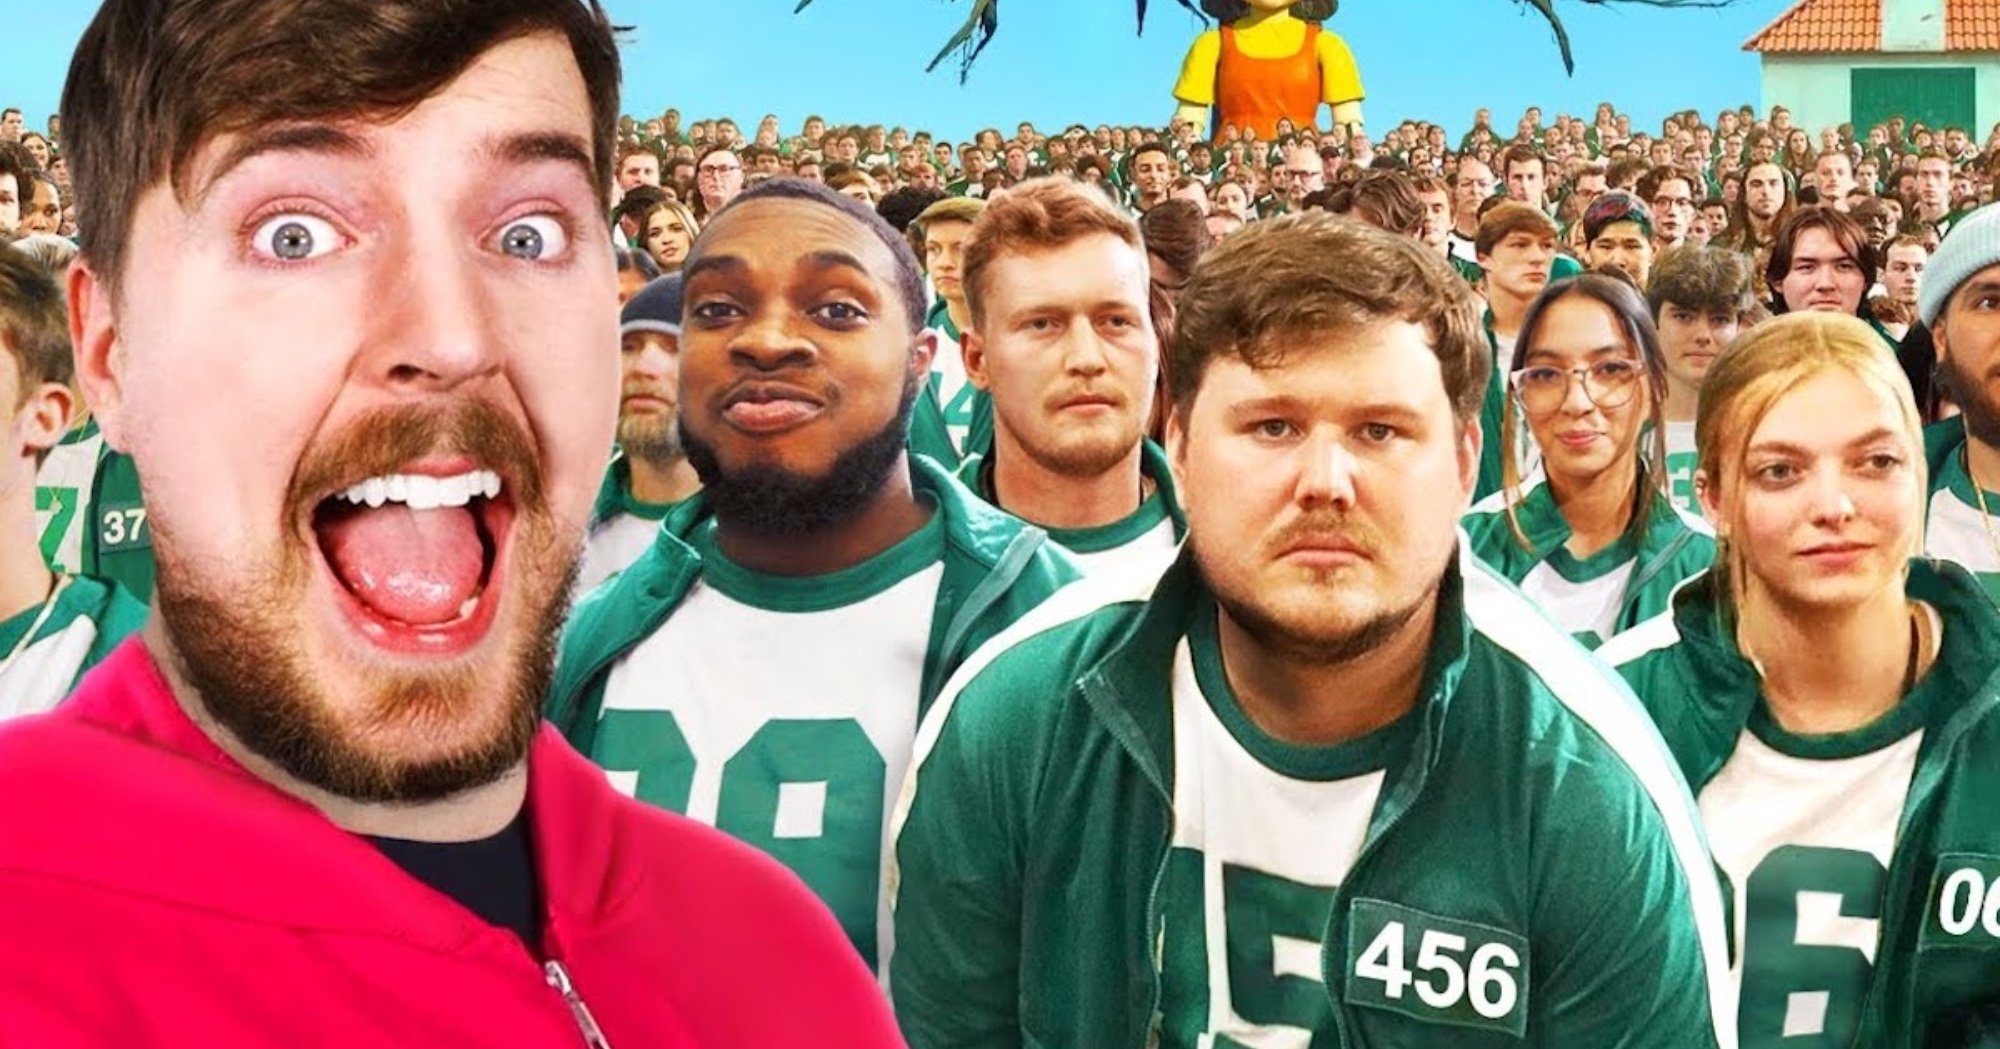 MrBeast 'Squid Game' Youtube video with players wearing green tracksuits.